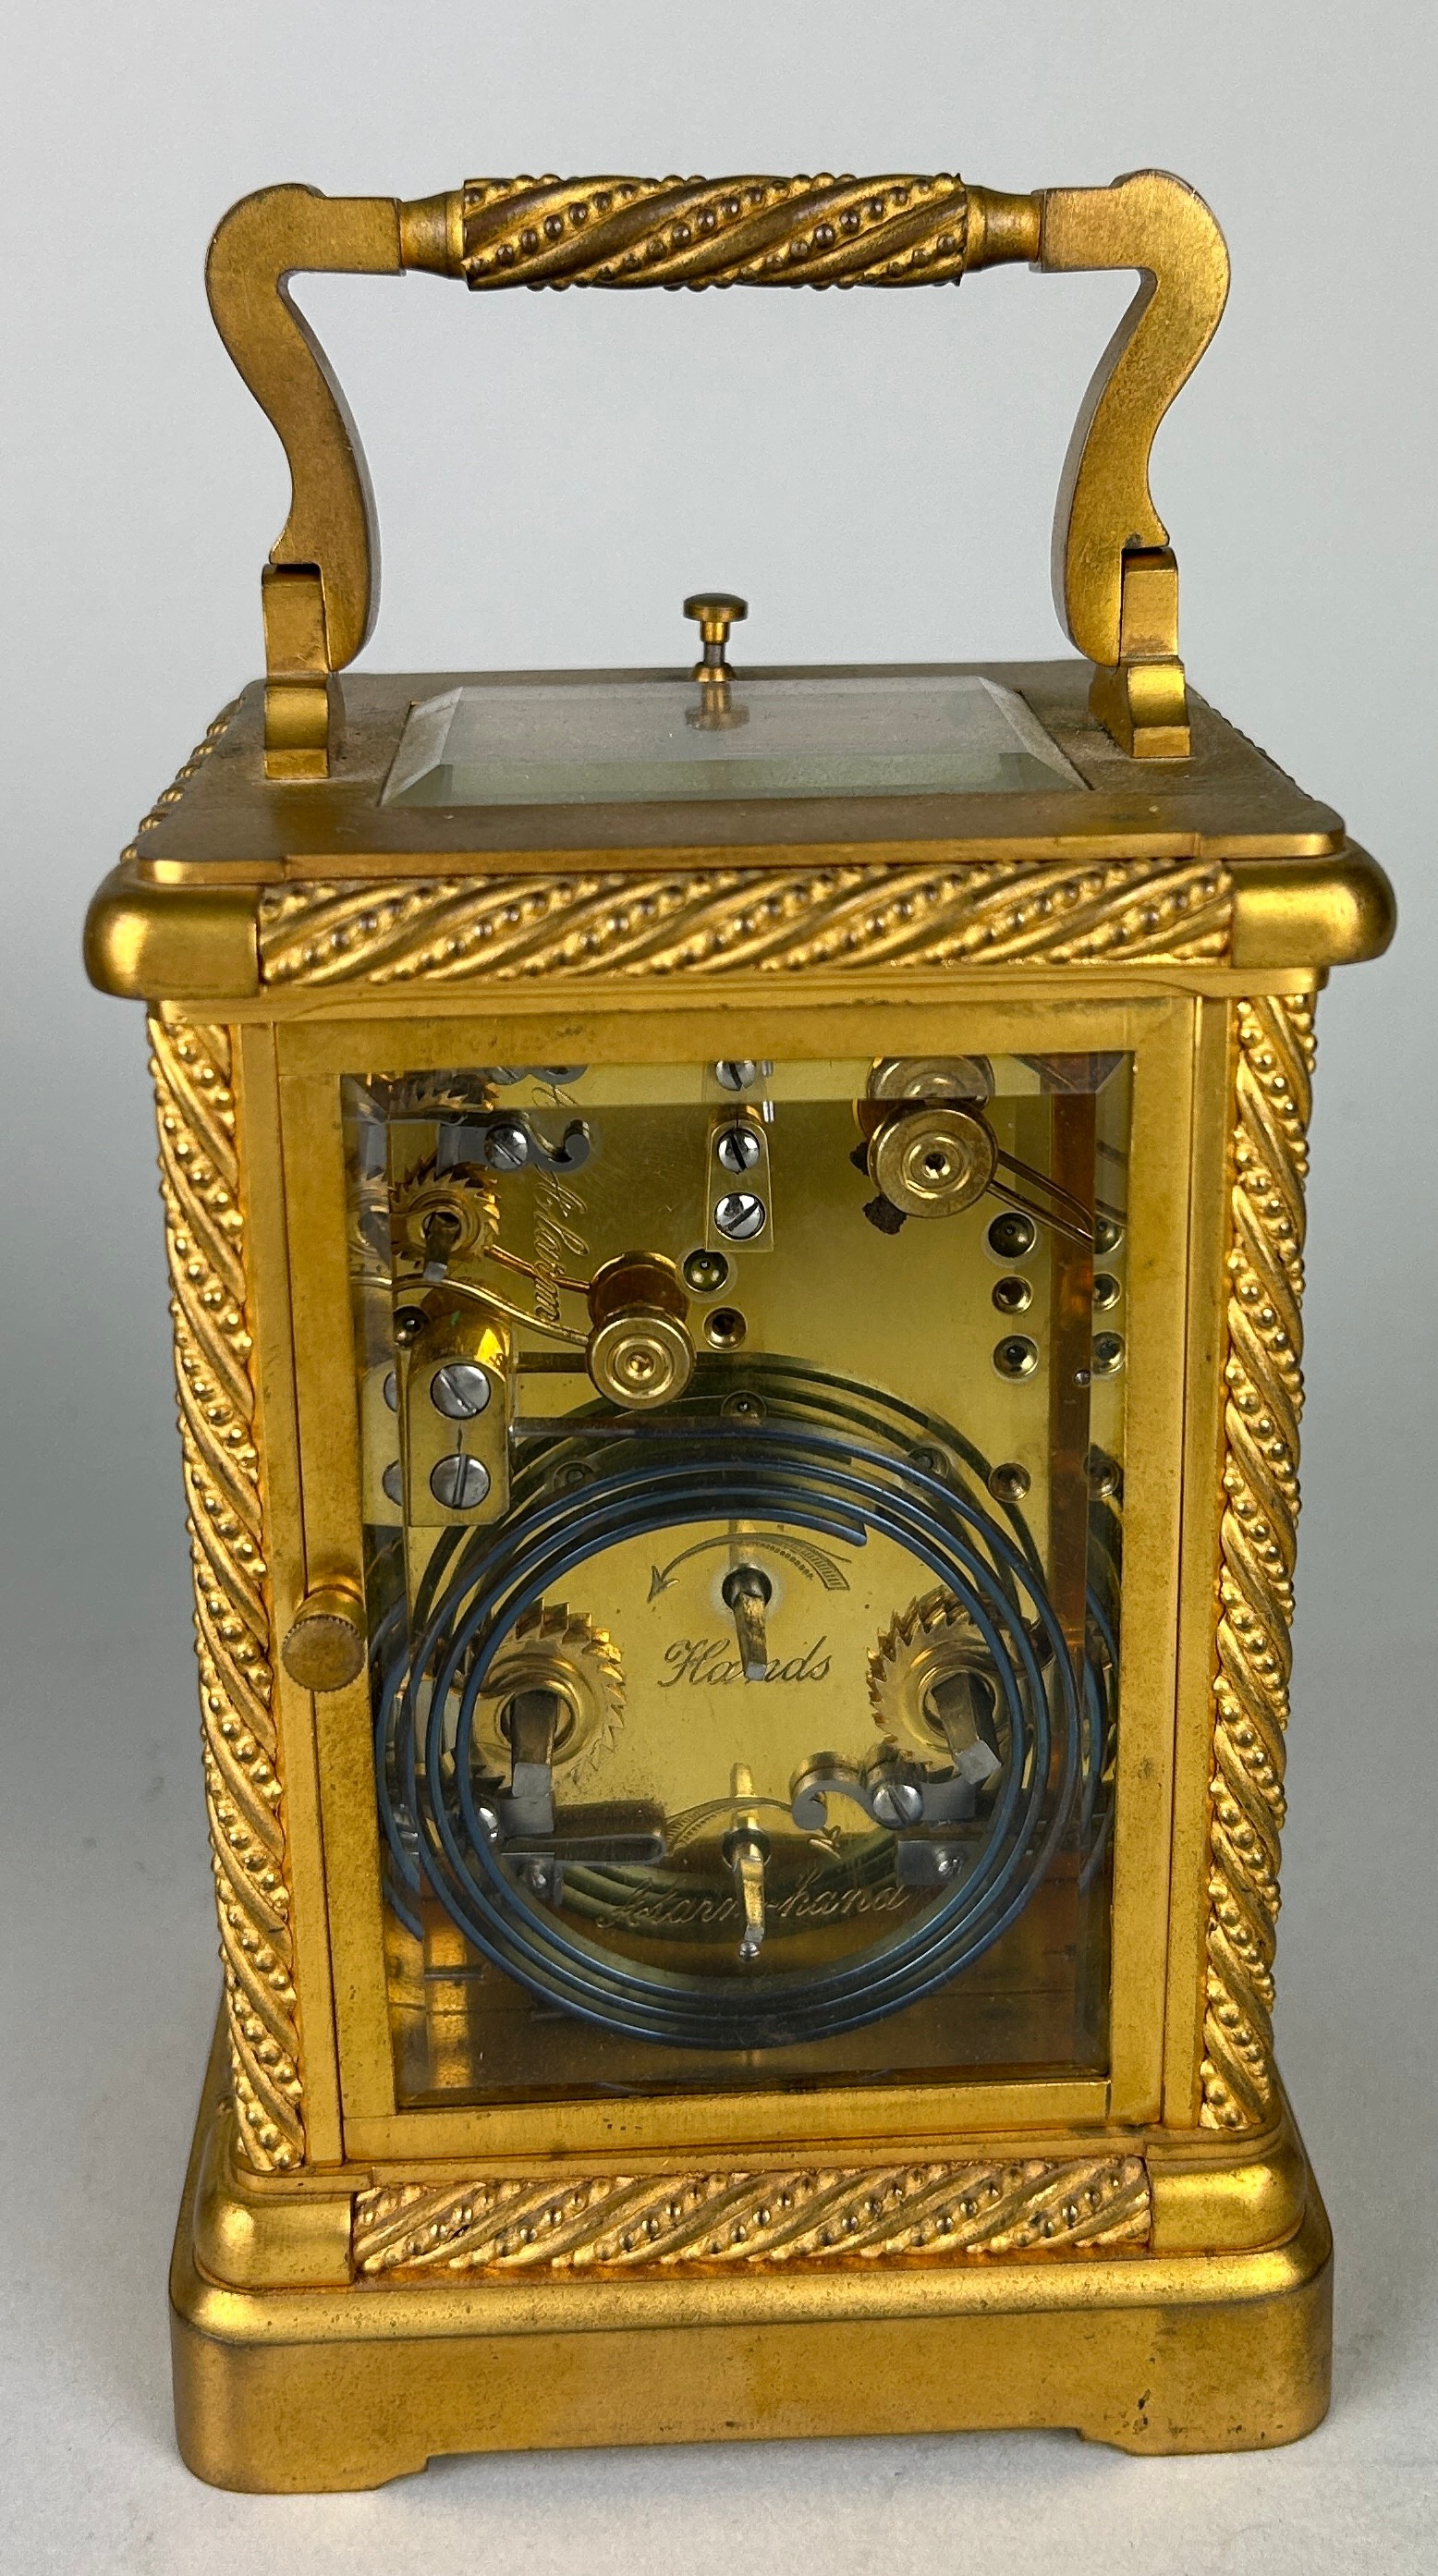 A GOOD CASED 19TH CENTURY FRENCH GILT BRONZE REPEATER CARRIAGE CLOCK WITH ALARM In working order. - Image 4 of 7